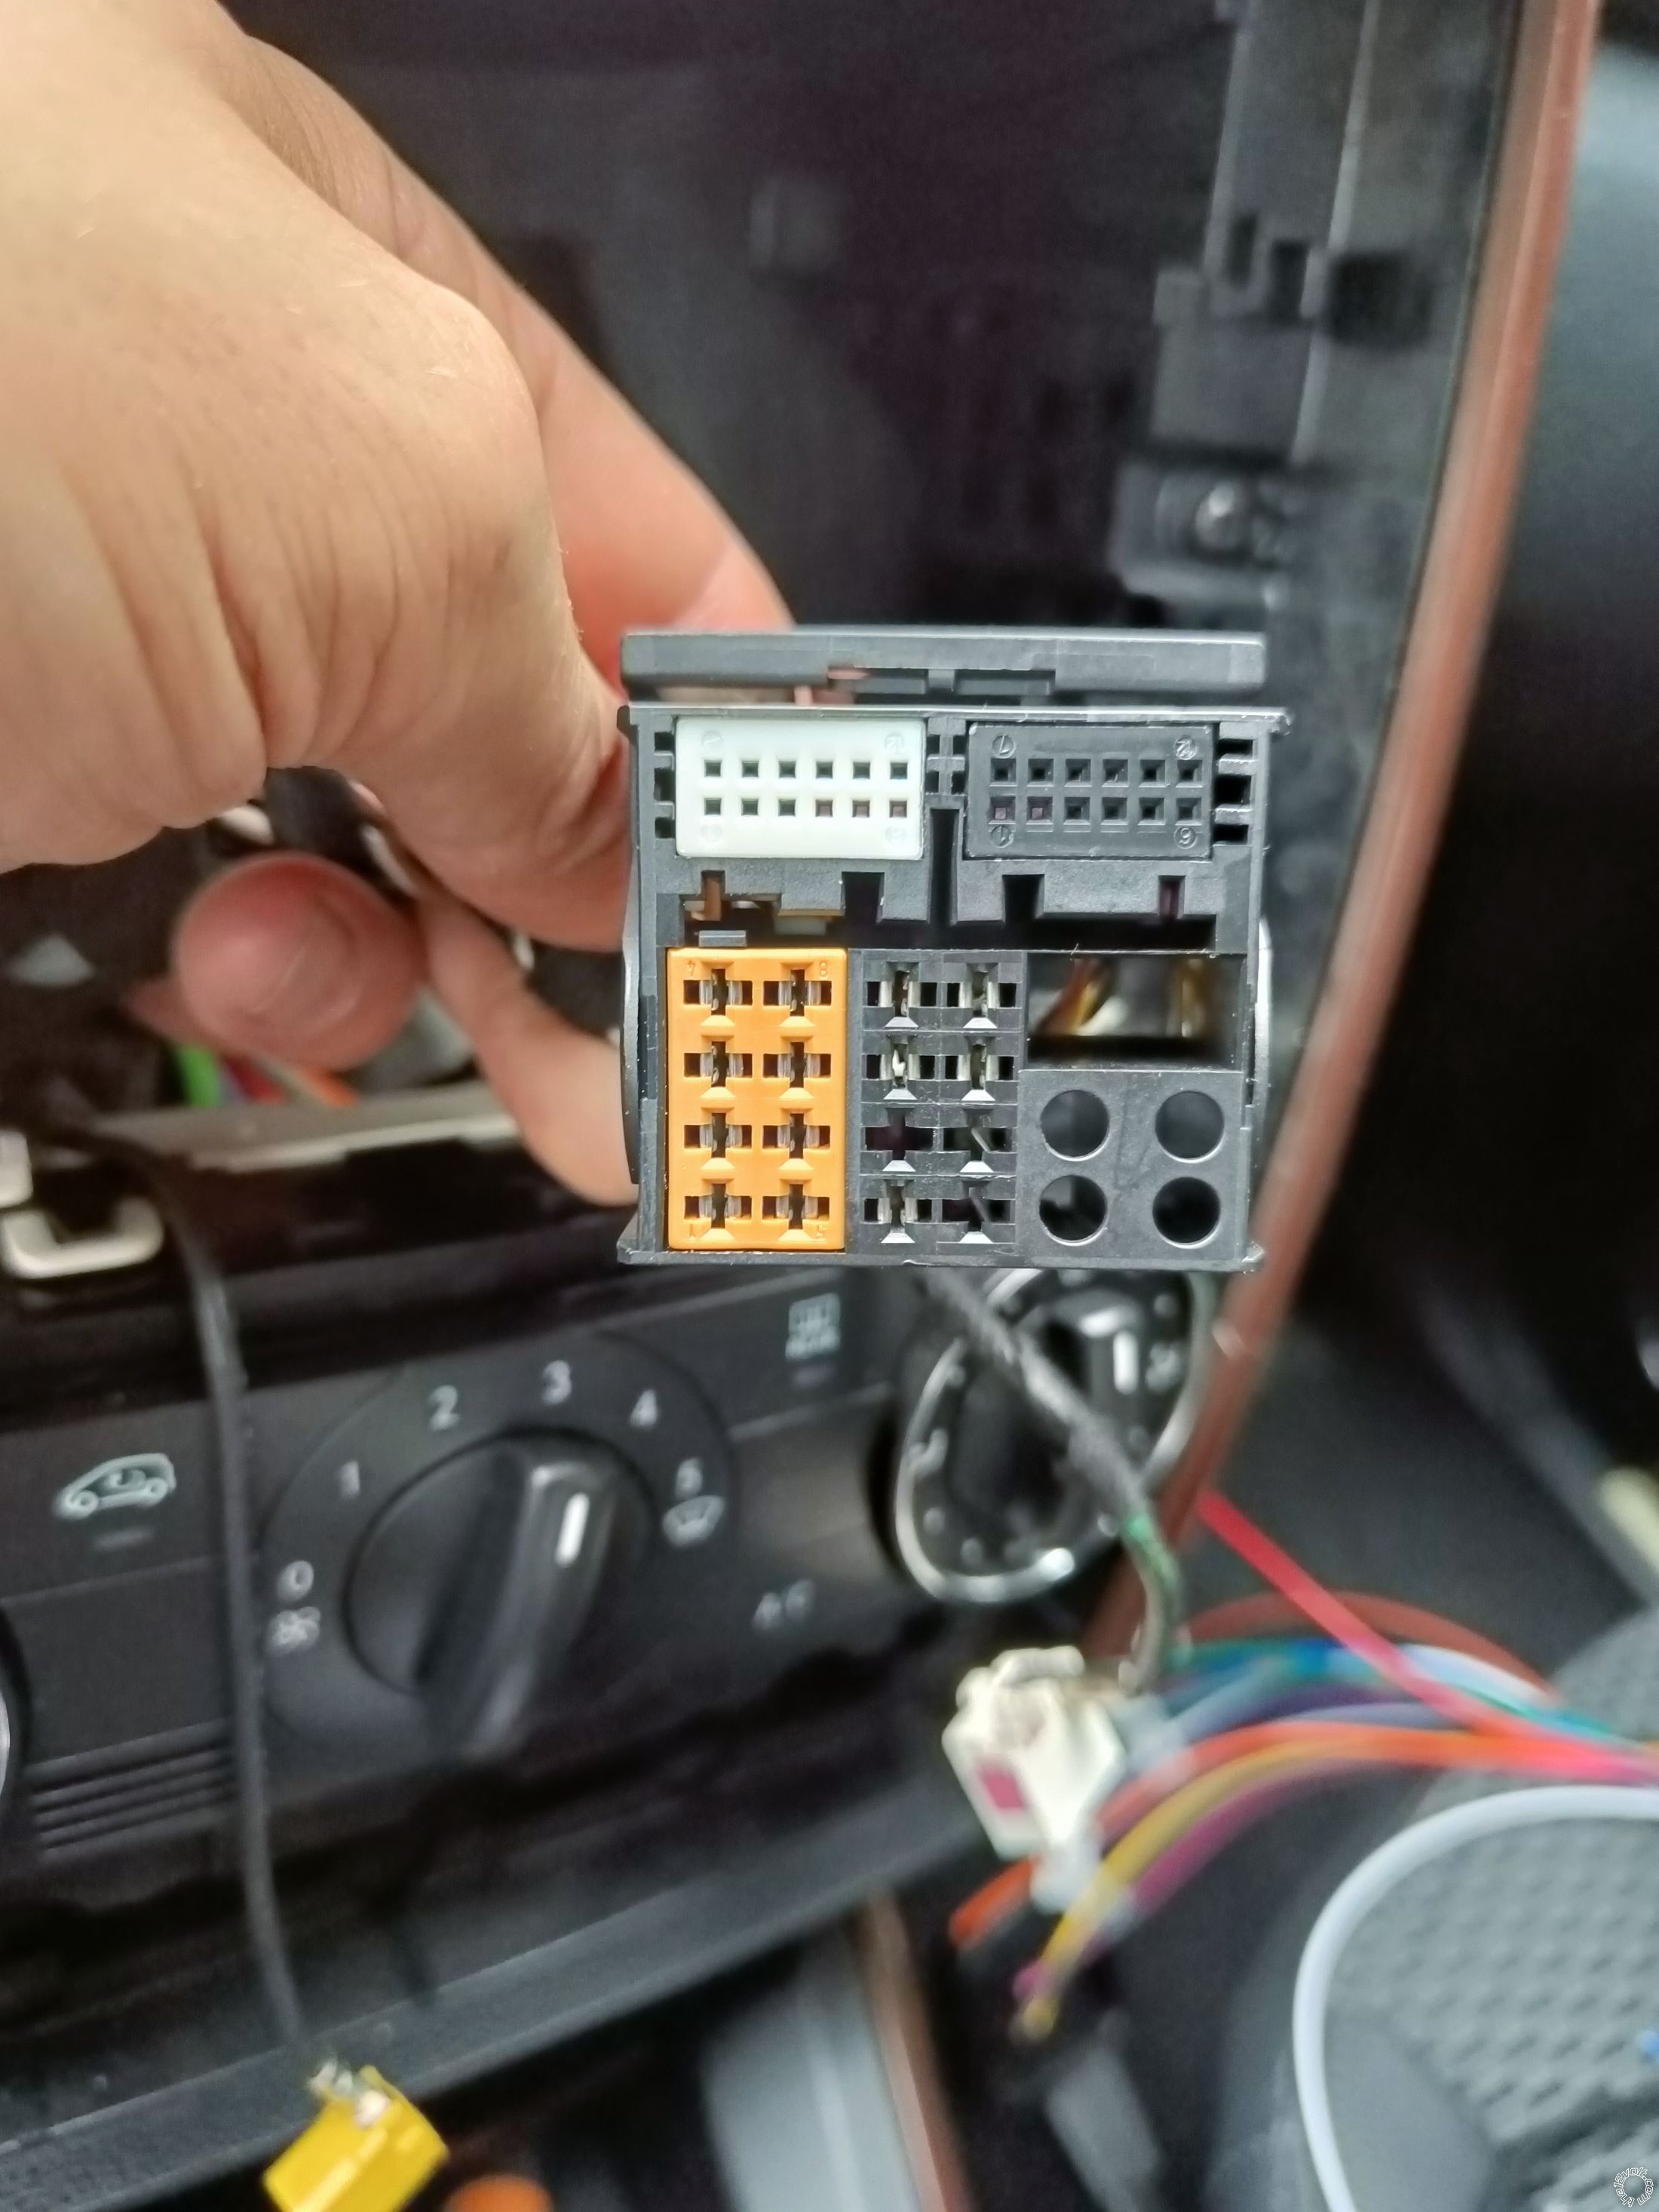 2010 Mercedes Benz A Class, MF2830 Stock Unit Wiring? - Last Post -- posted image.